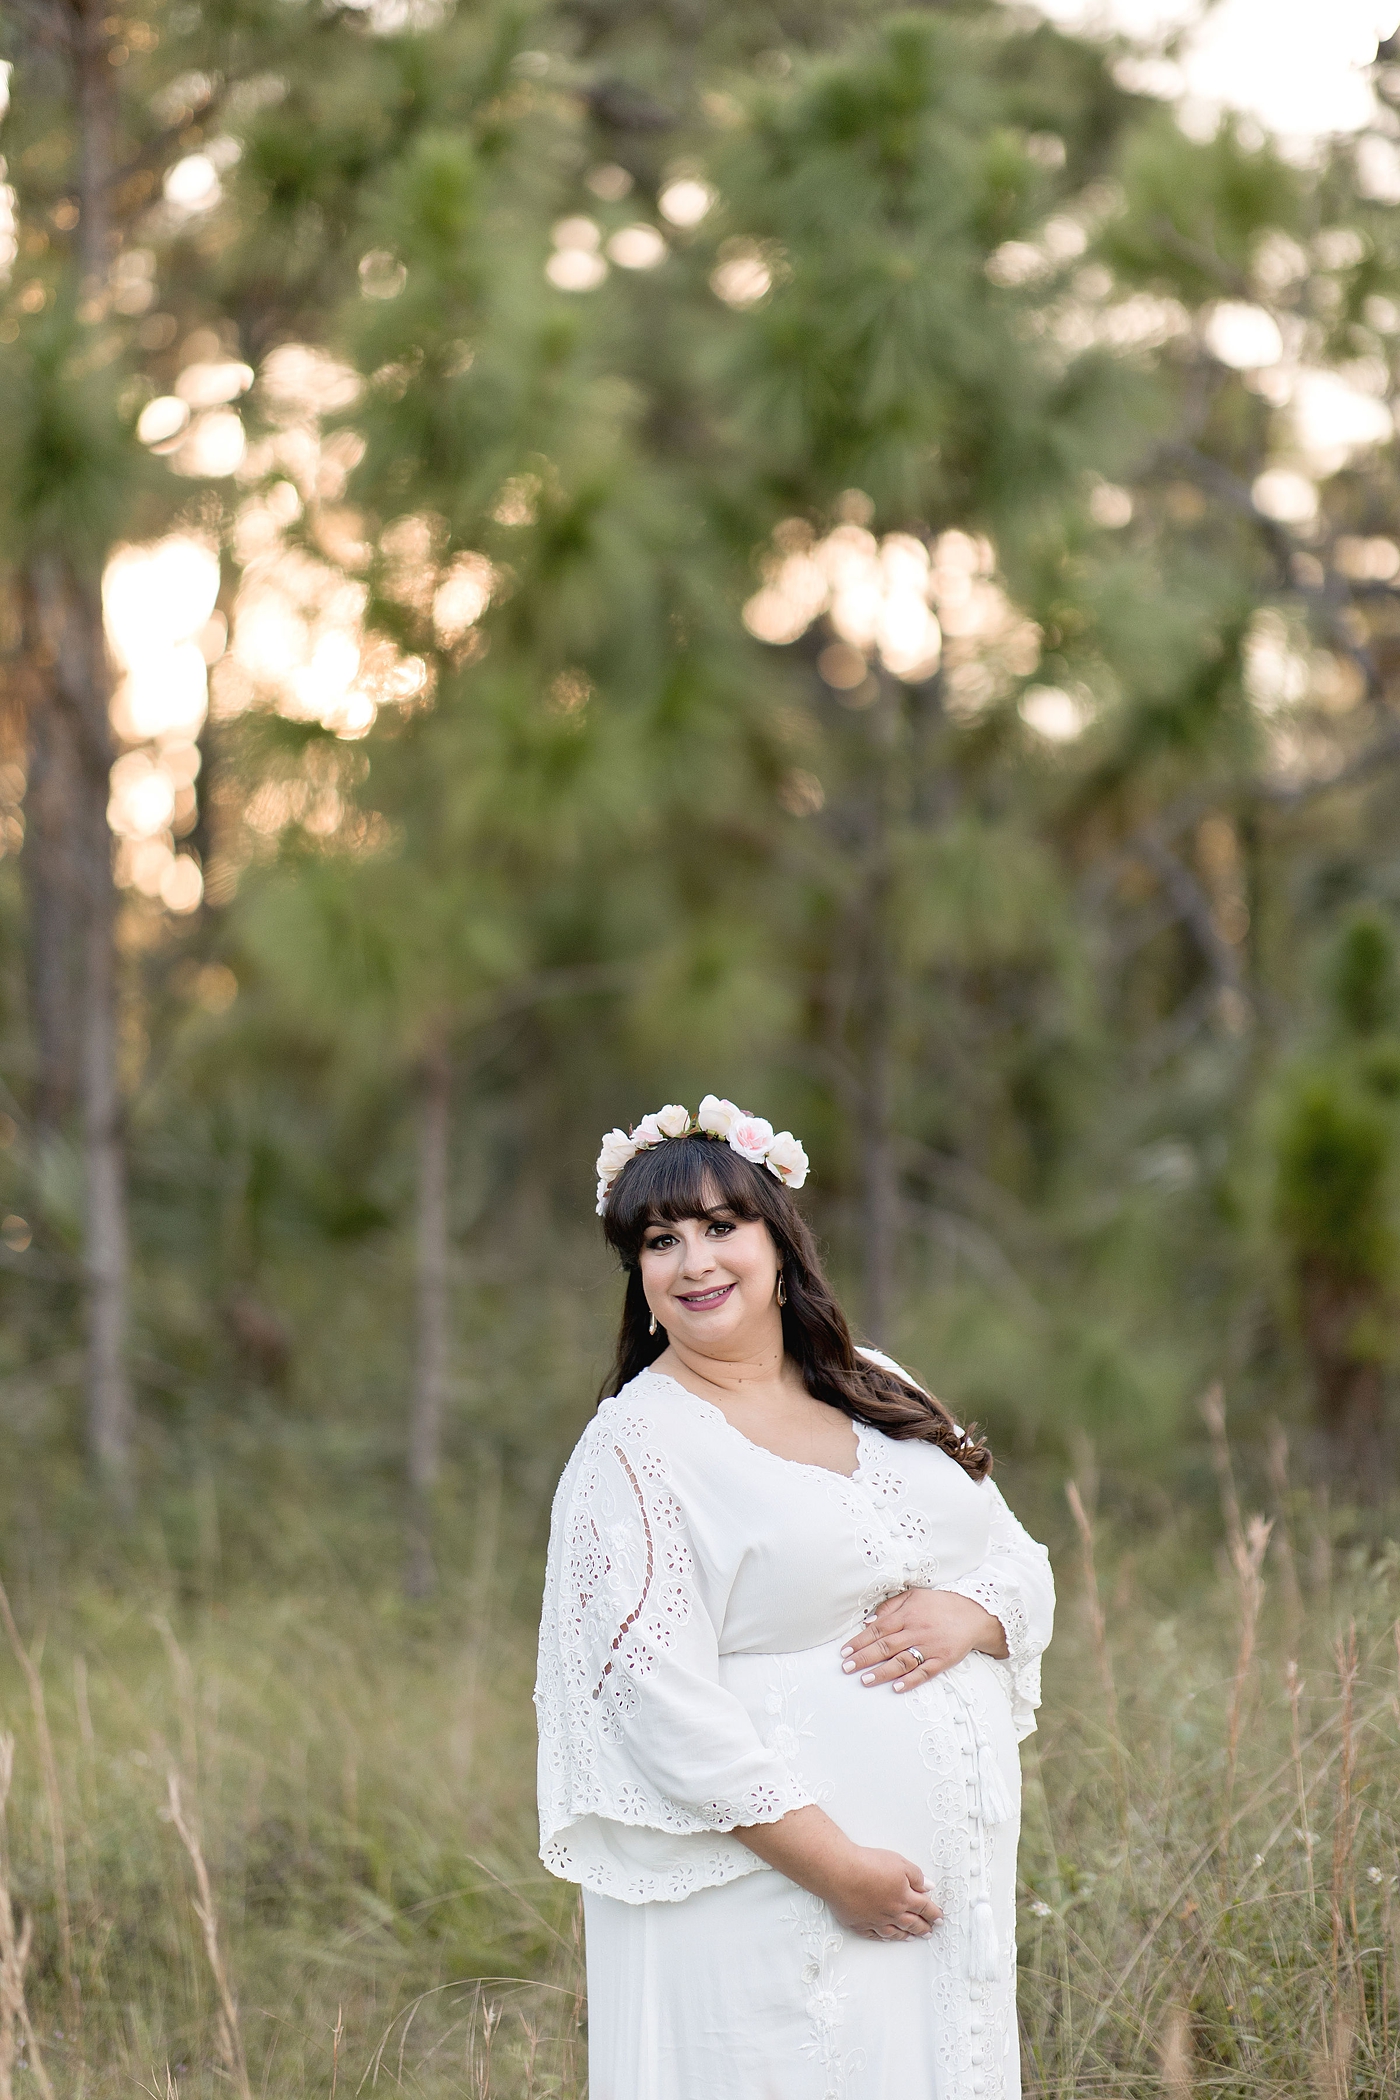 Plus Size Maternity Photoshoot Mother nature inspired maternity session by South Florida Maternity Photographer Ivanna Vidal Photography.